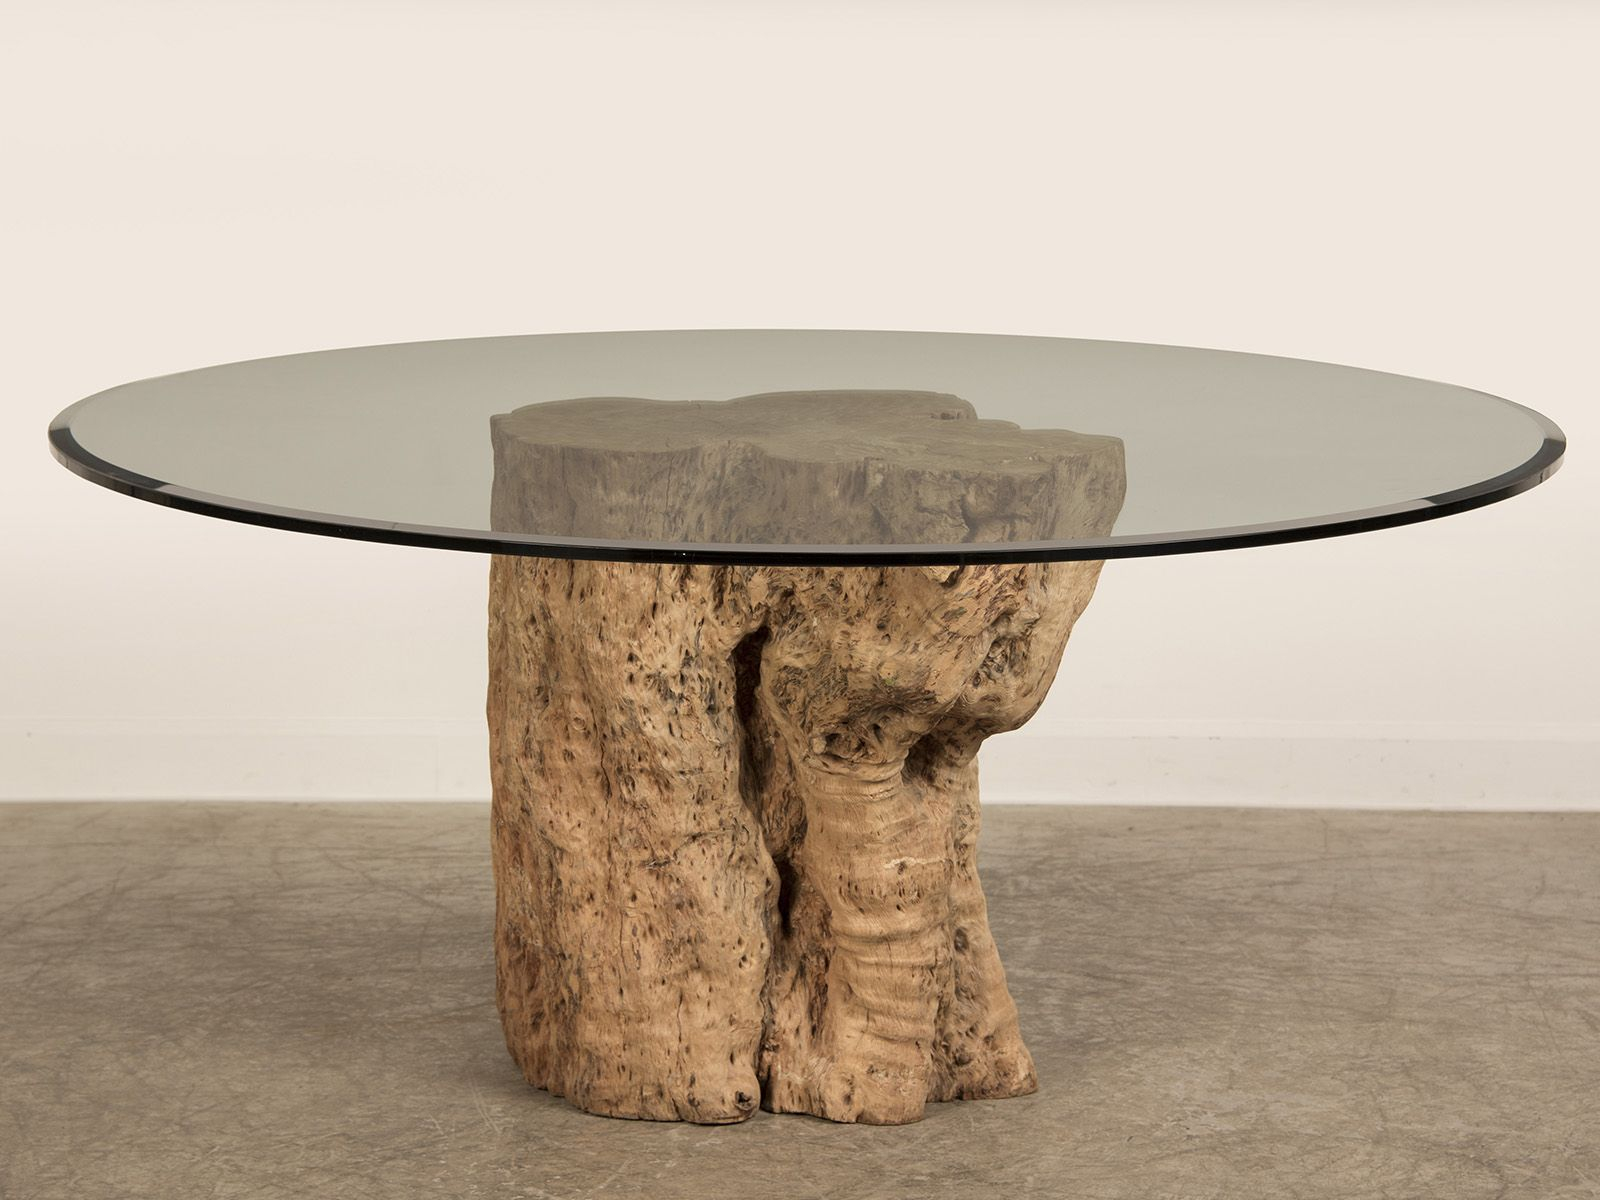 Awesome Teak Tree Trunk Table With Circled Glass Top As Inspiring within dimensions 1600 X 1200